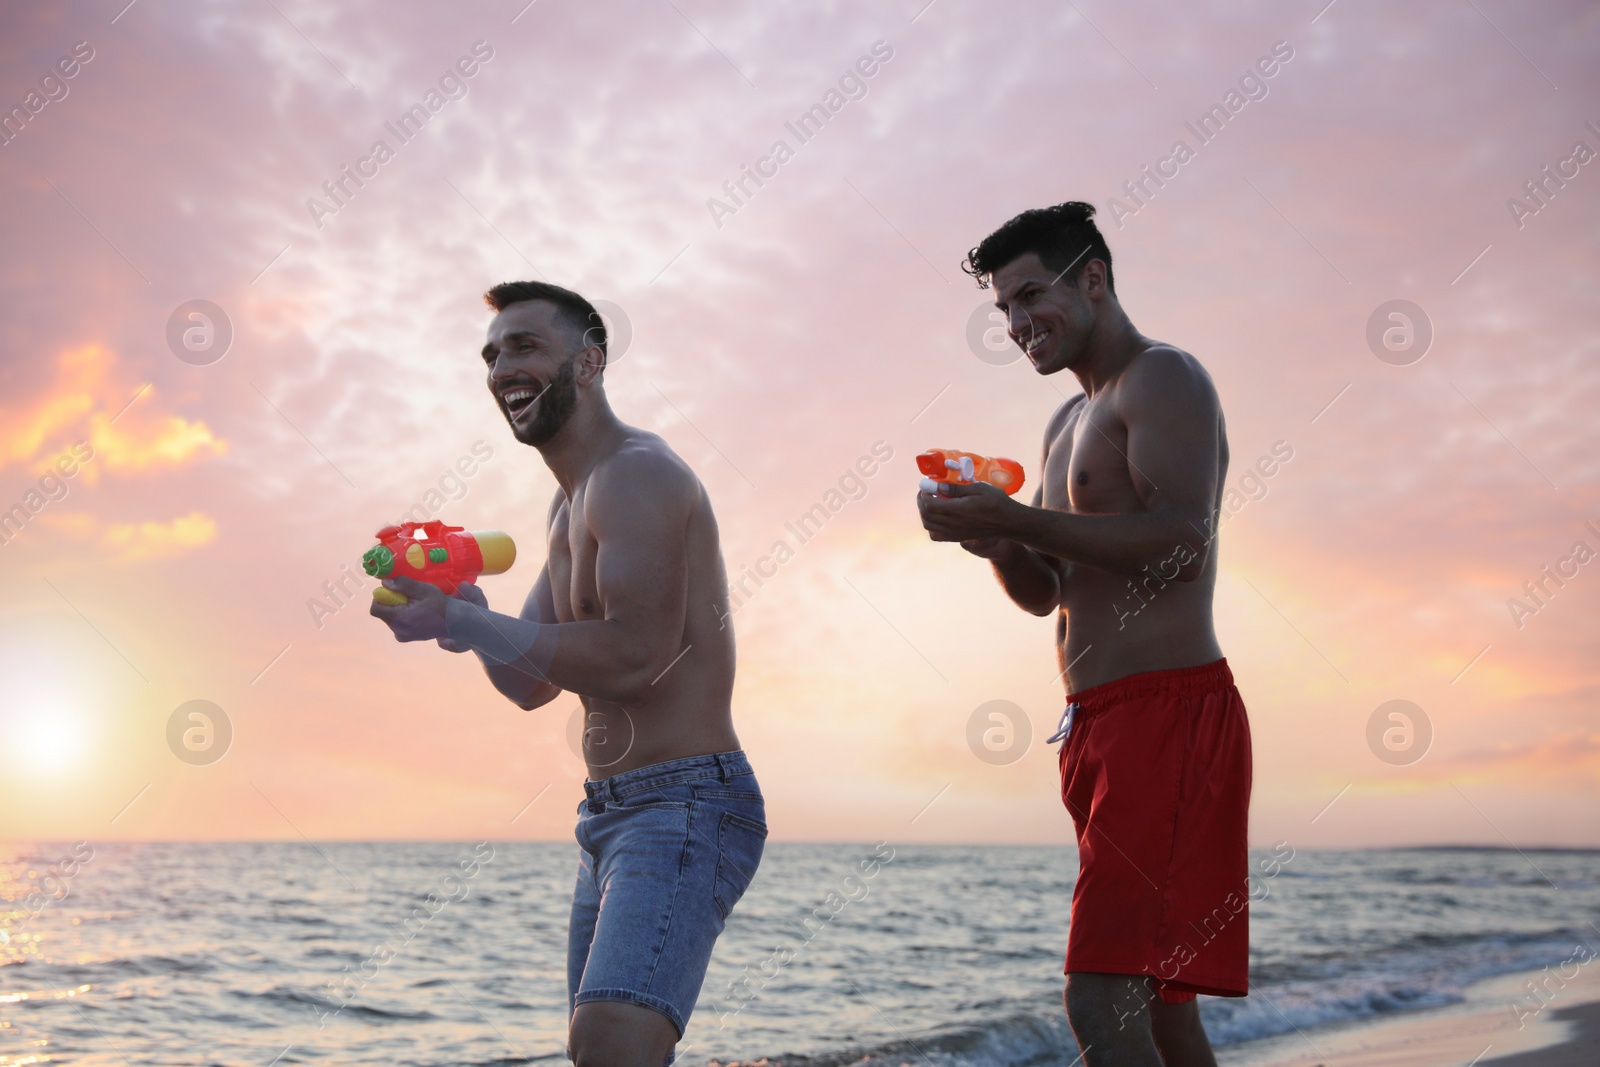 Photo of Friends with water guns having fun on beach at sunset